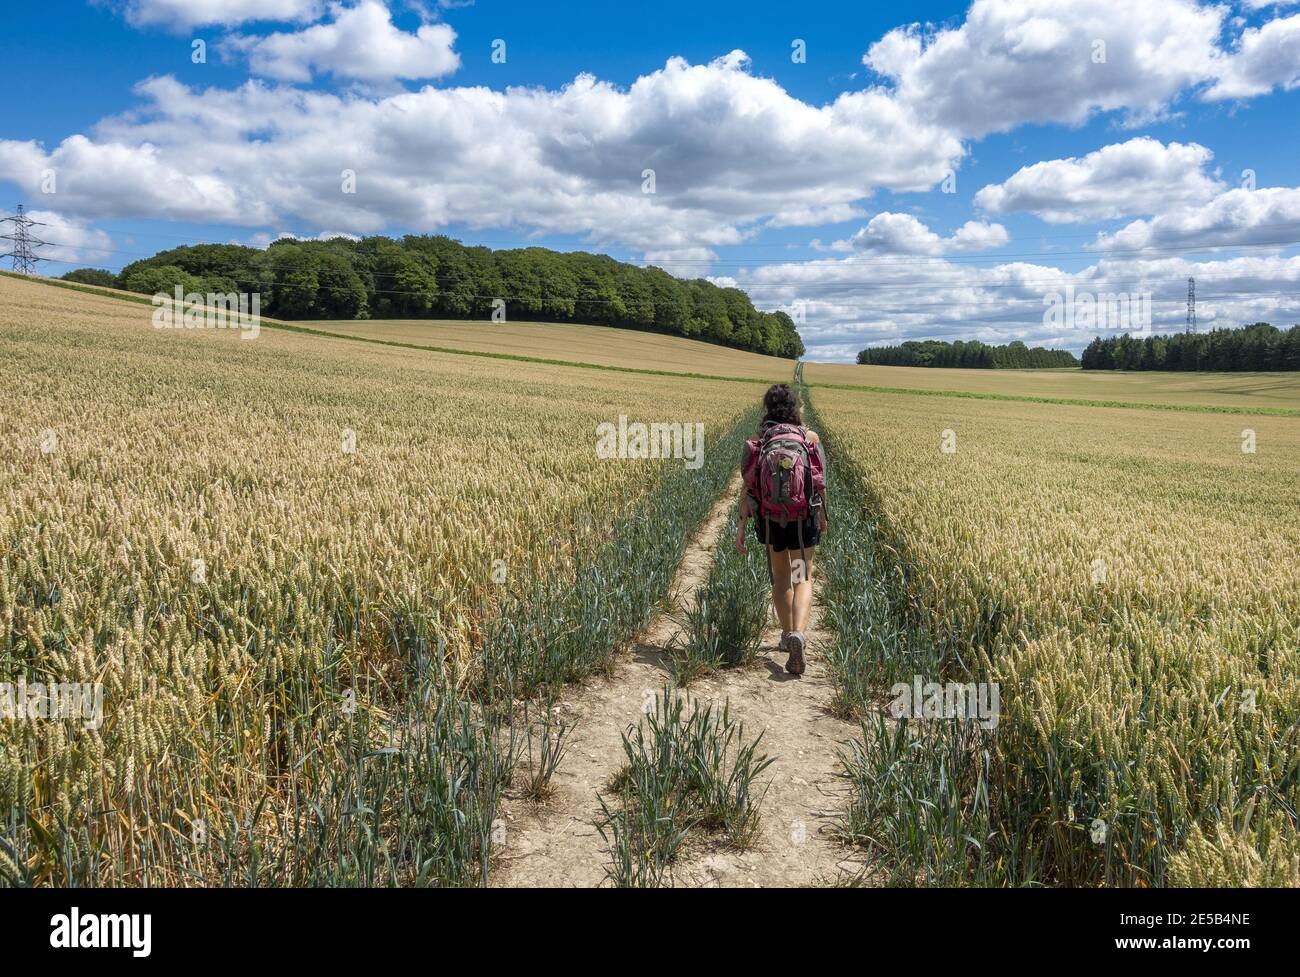 Hiker walking the Hangers Way a 21-mile-long-distance footpath through Hampshire, England from Alton to Queen Elizabeth Country Park Stock Photo